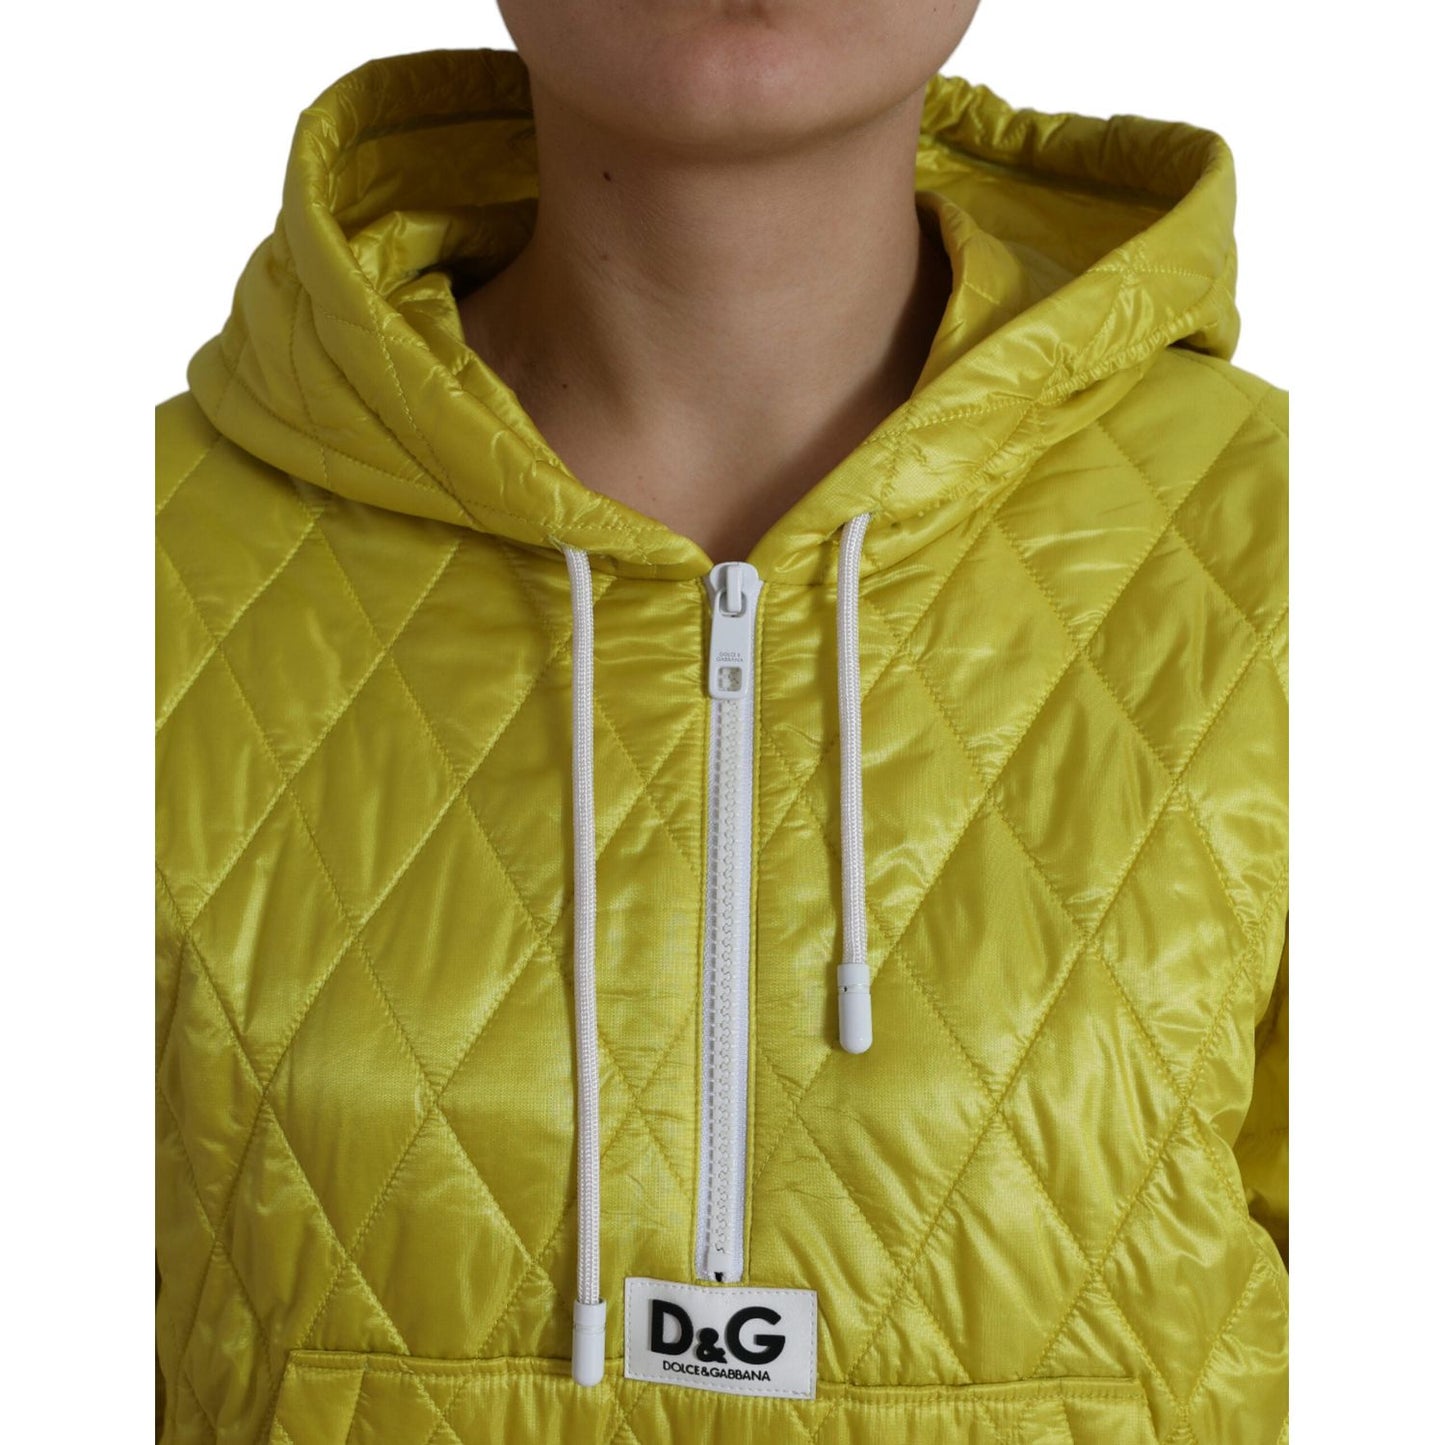 Dolce & Gabbana Radiant Yellow Hooded Jacket yellow-nylon-quilted-hooded-pullover-jacket-1